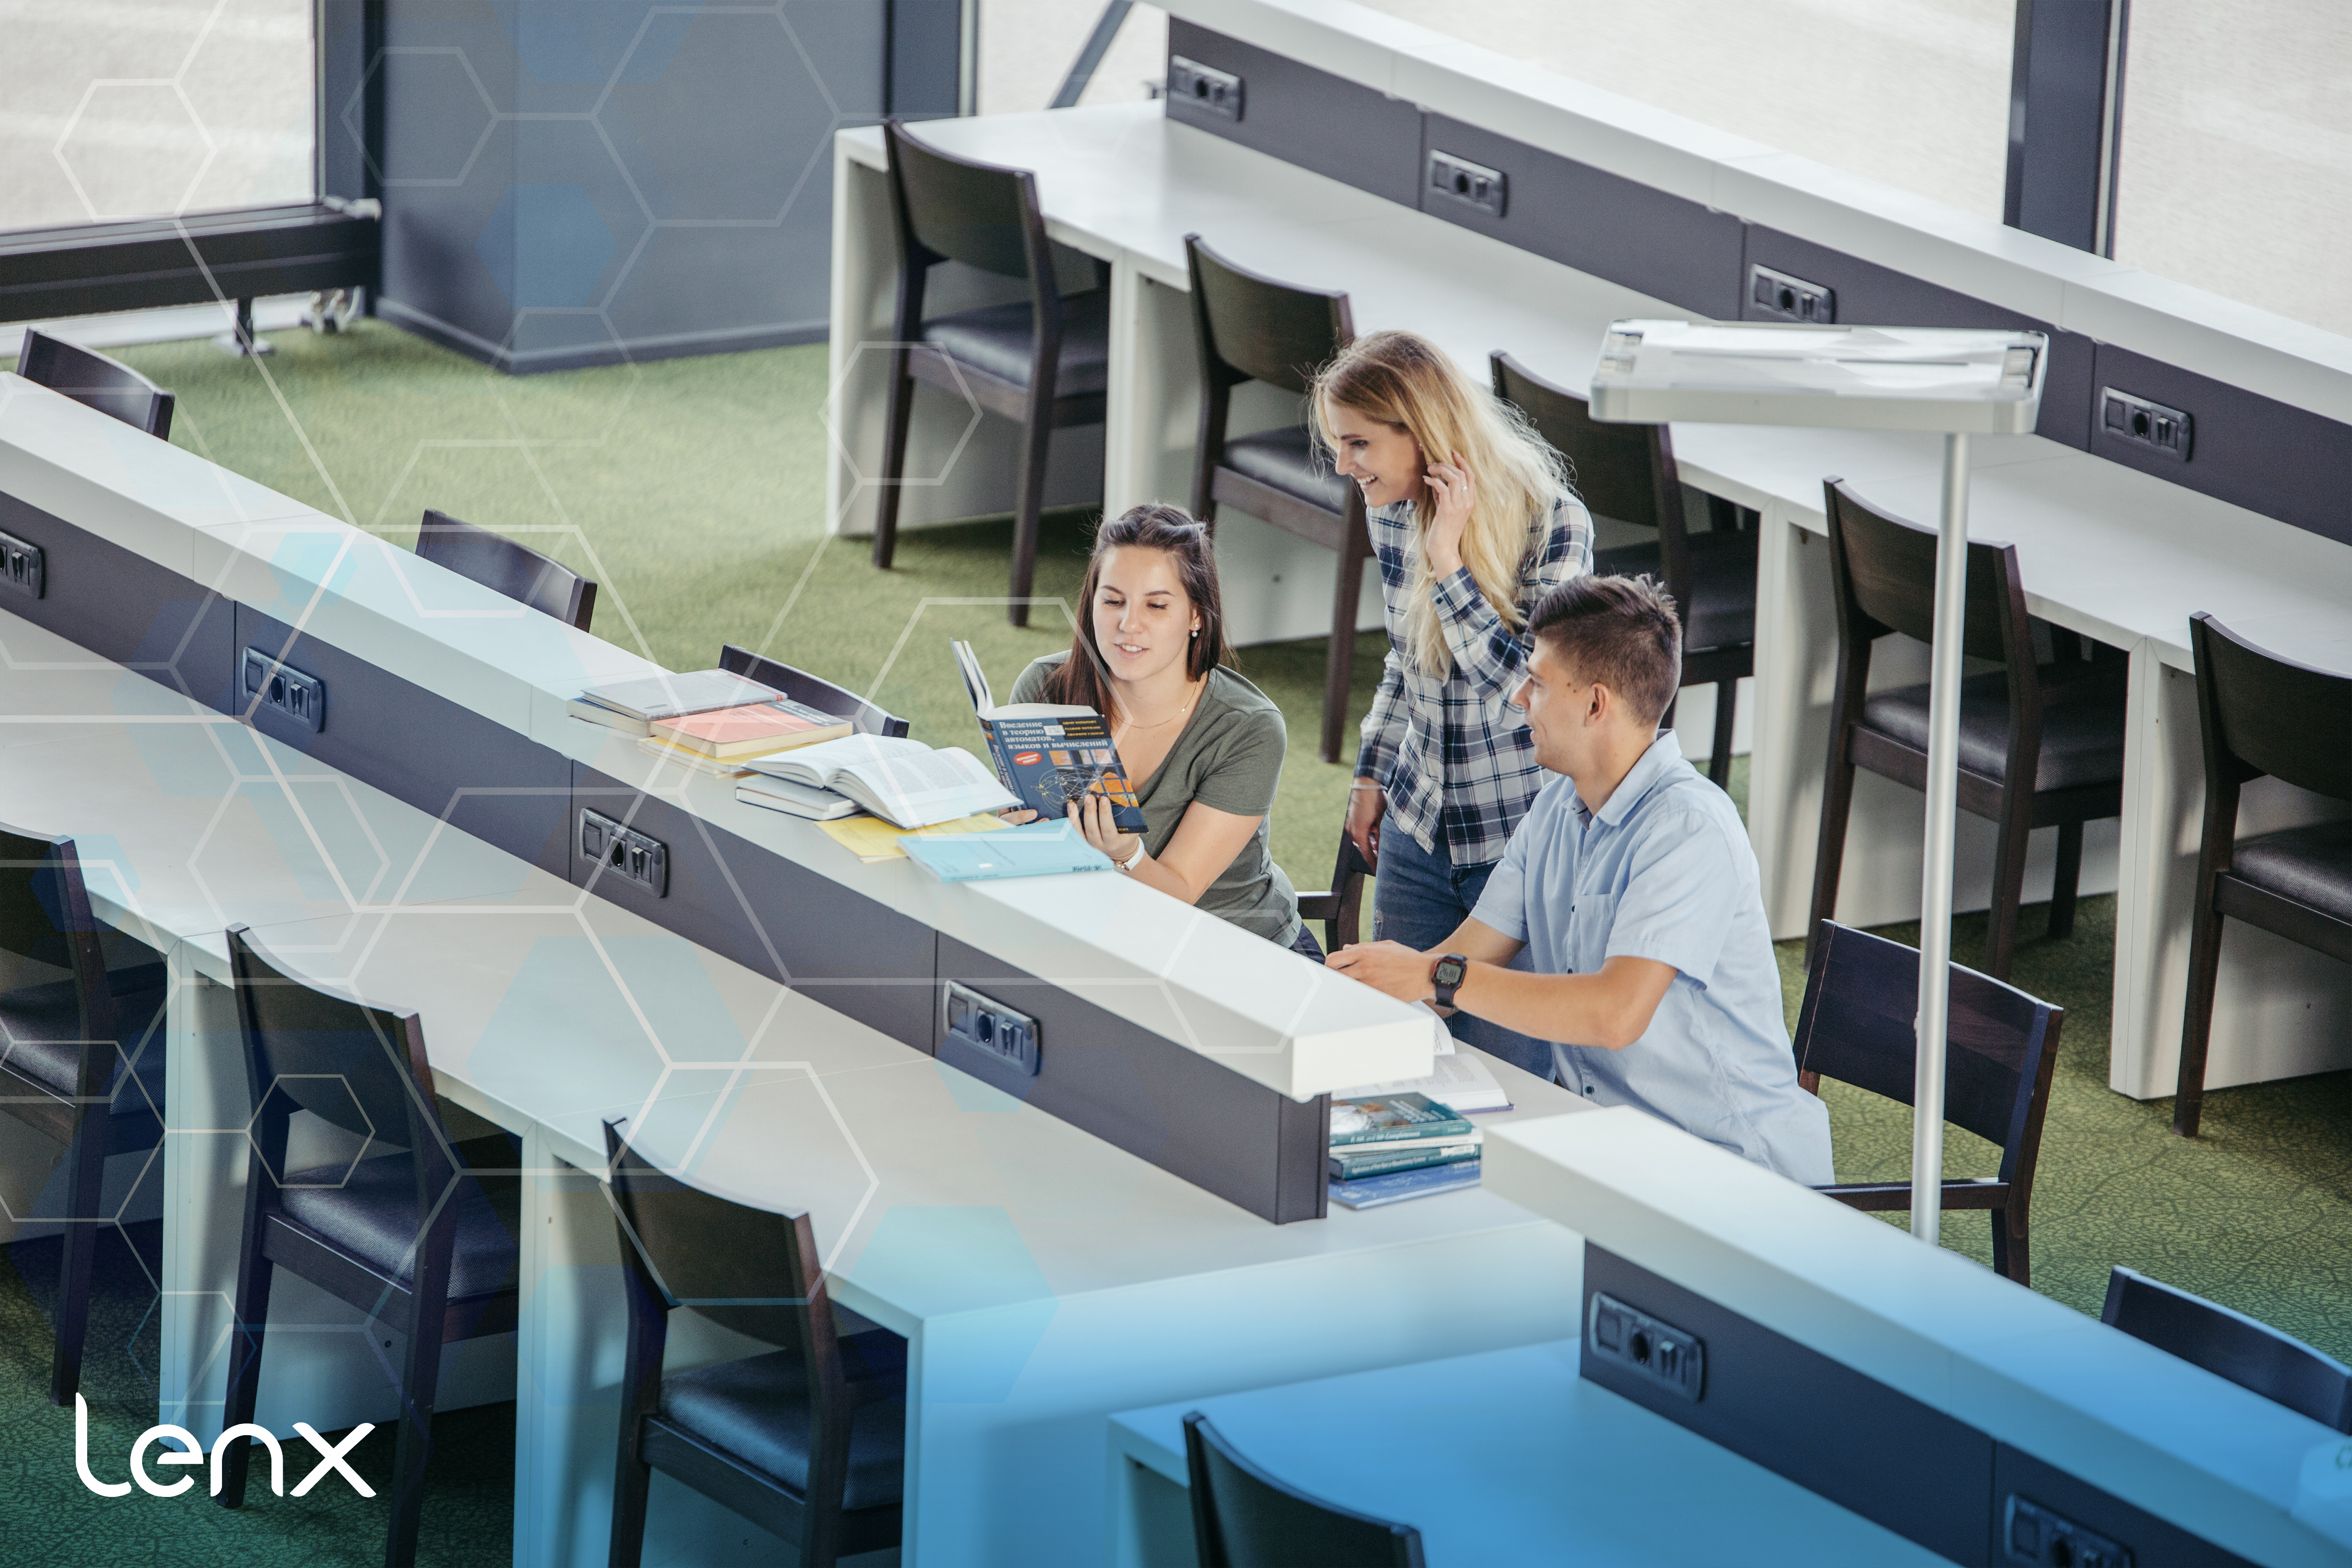 Protecting Universities Using AI Security and Active Shooter Detection Systems